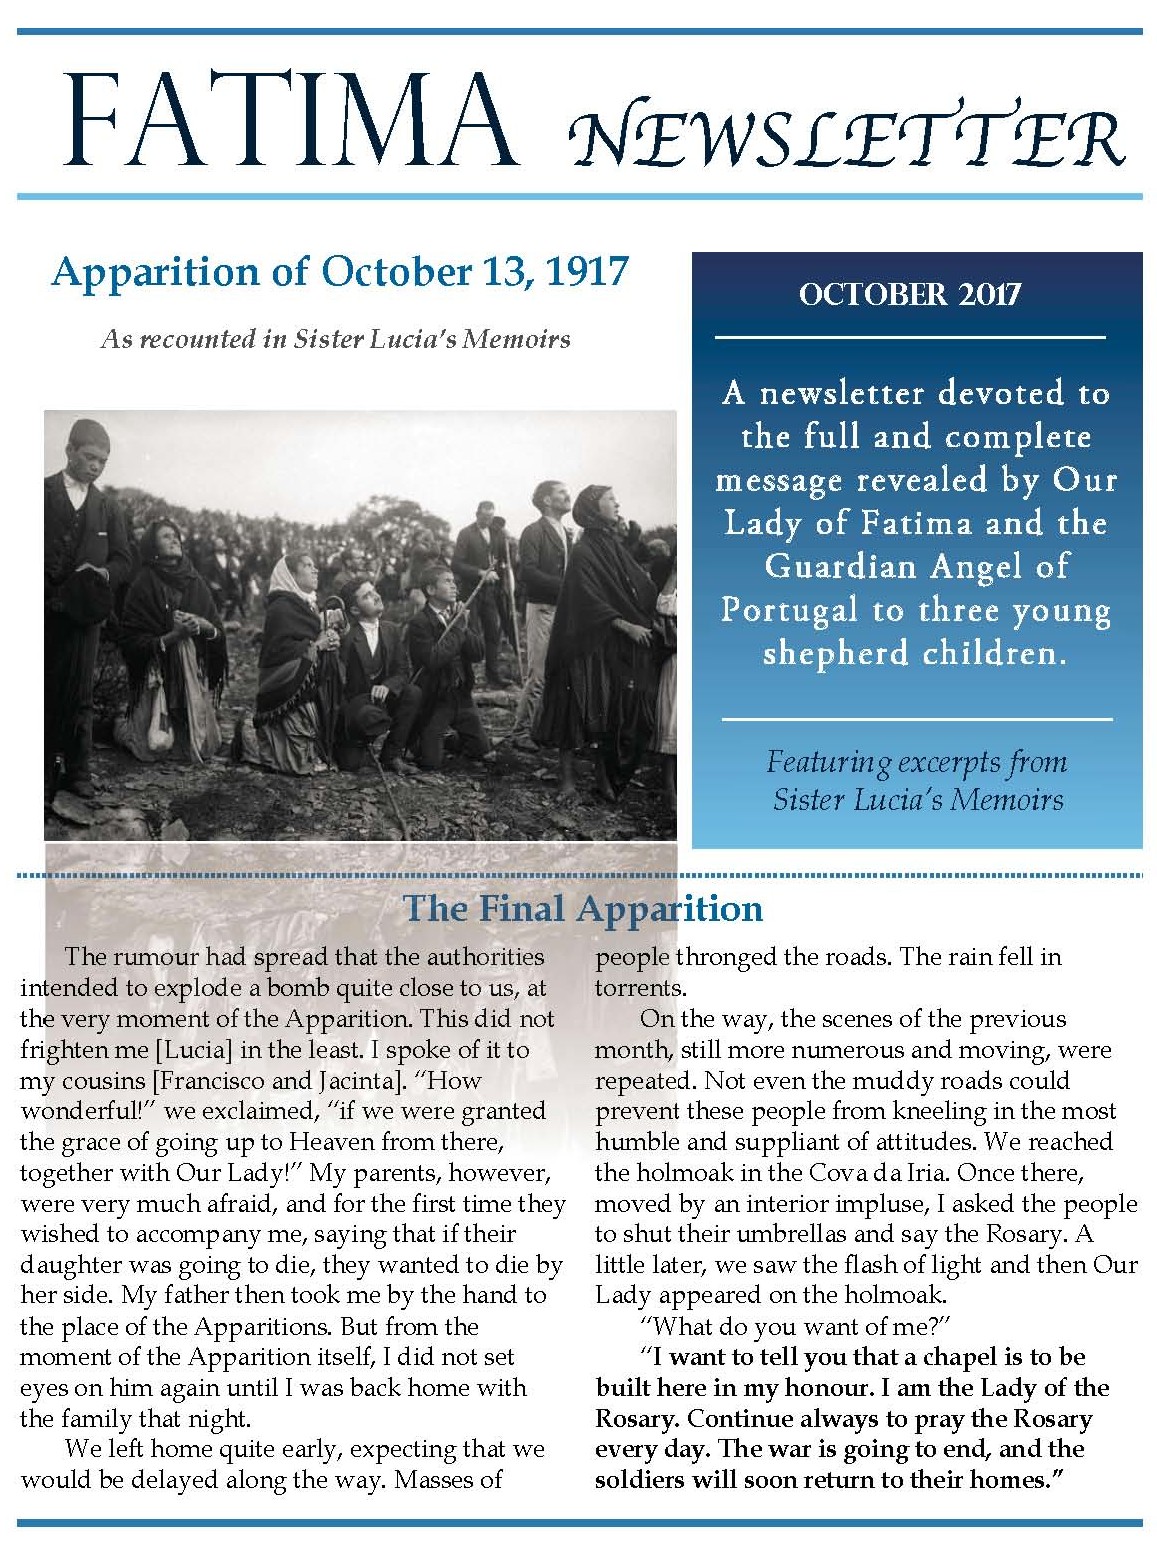 Fatima Newsletter_October 2017 2_Page_1